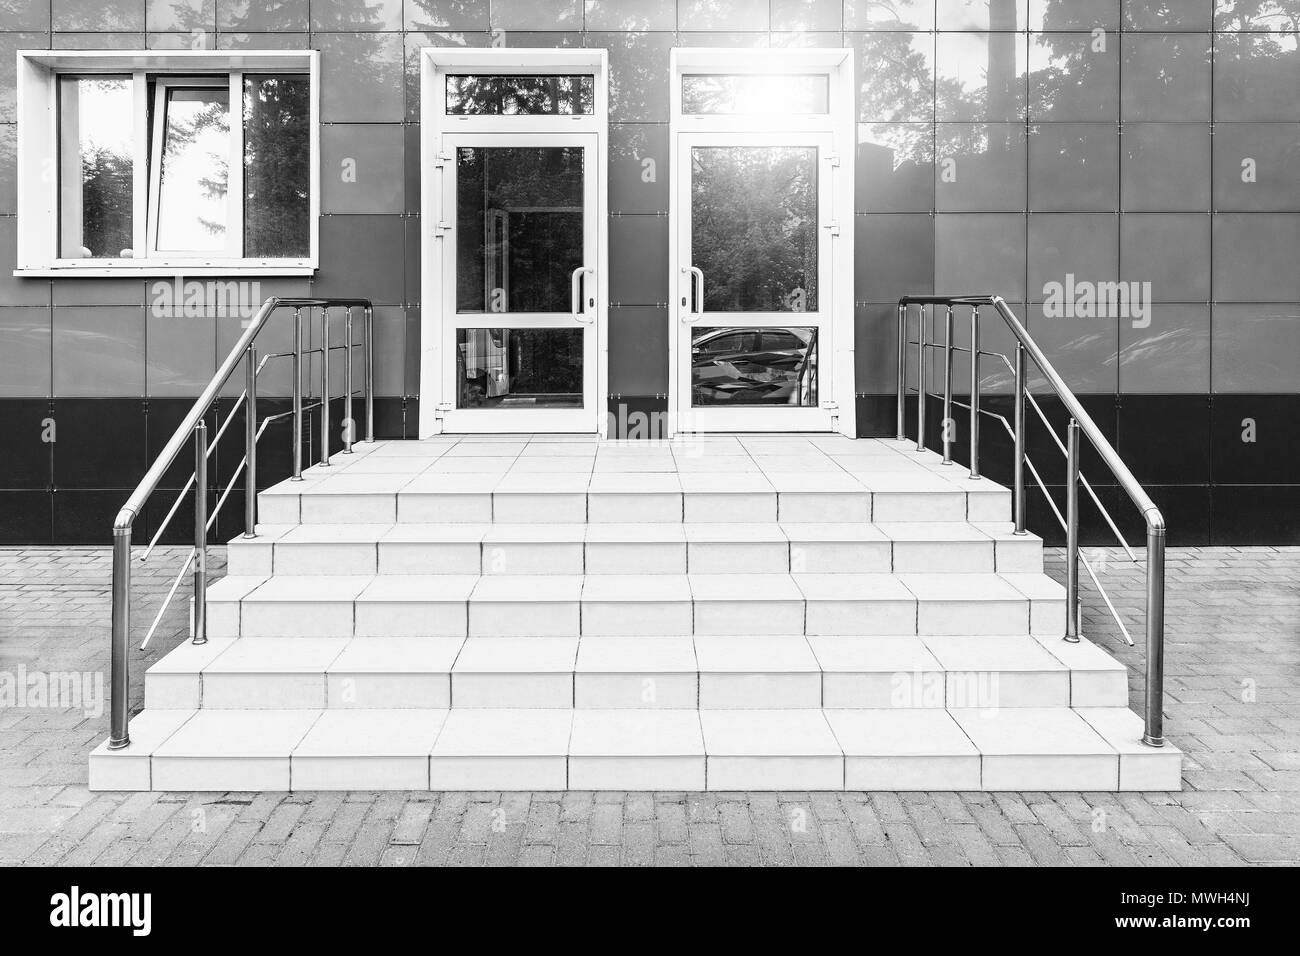 Entrance of the modern business building. Stock Photo